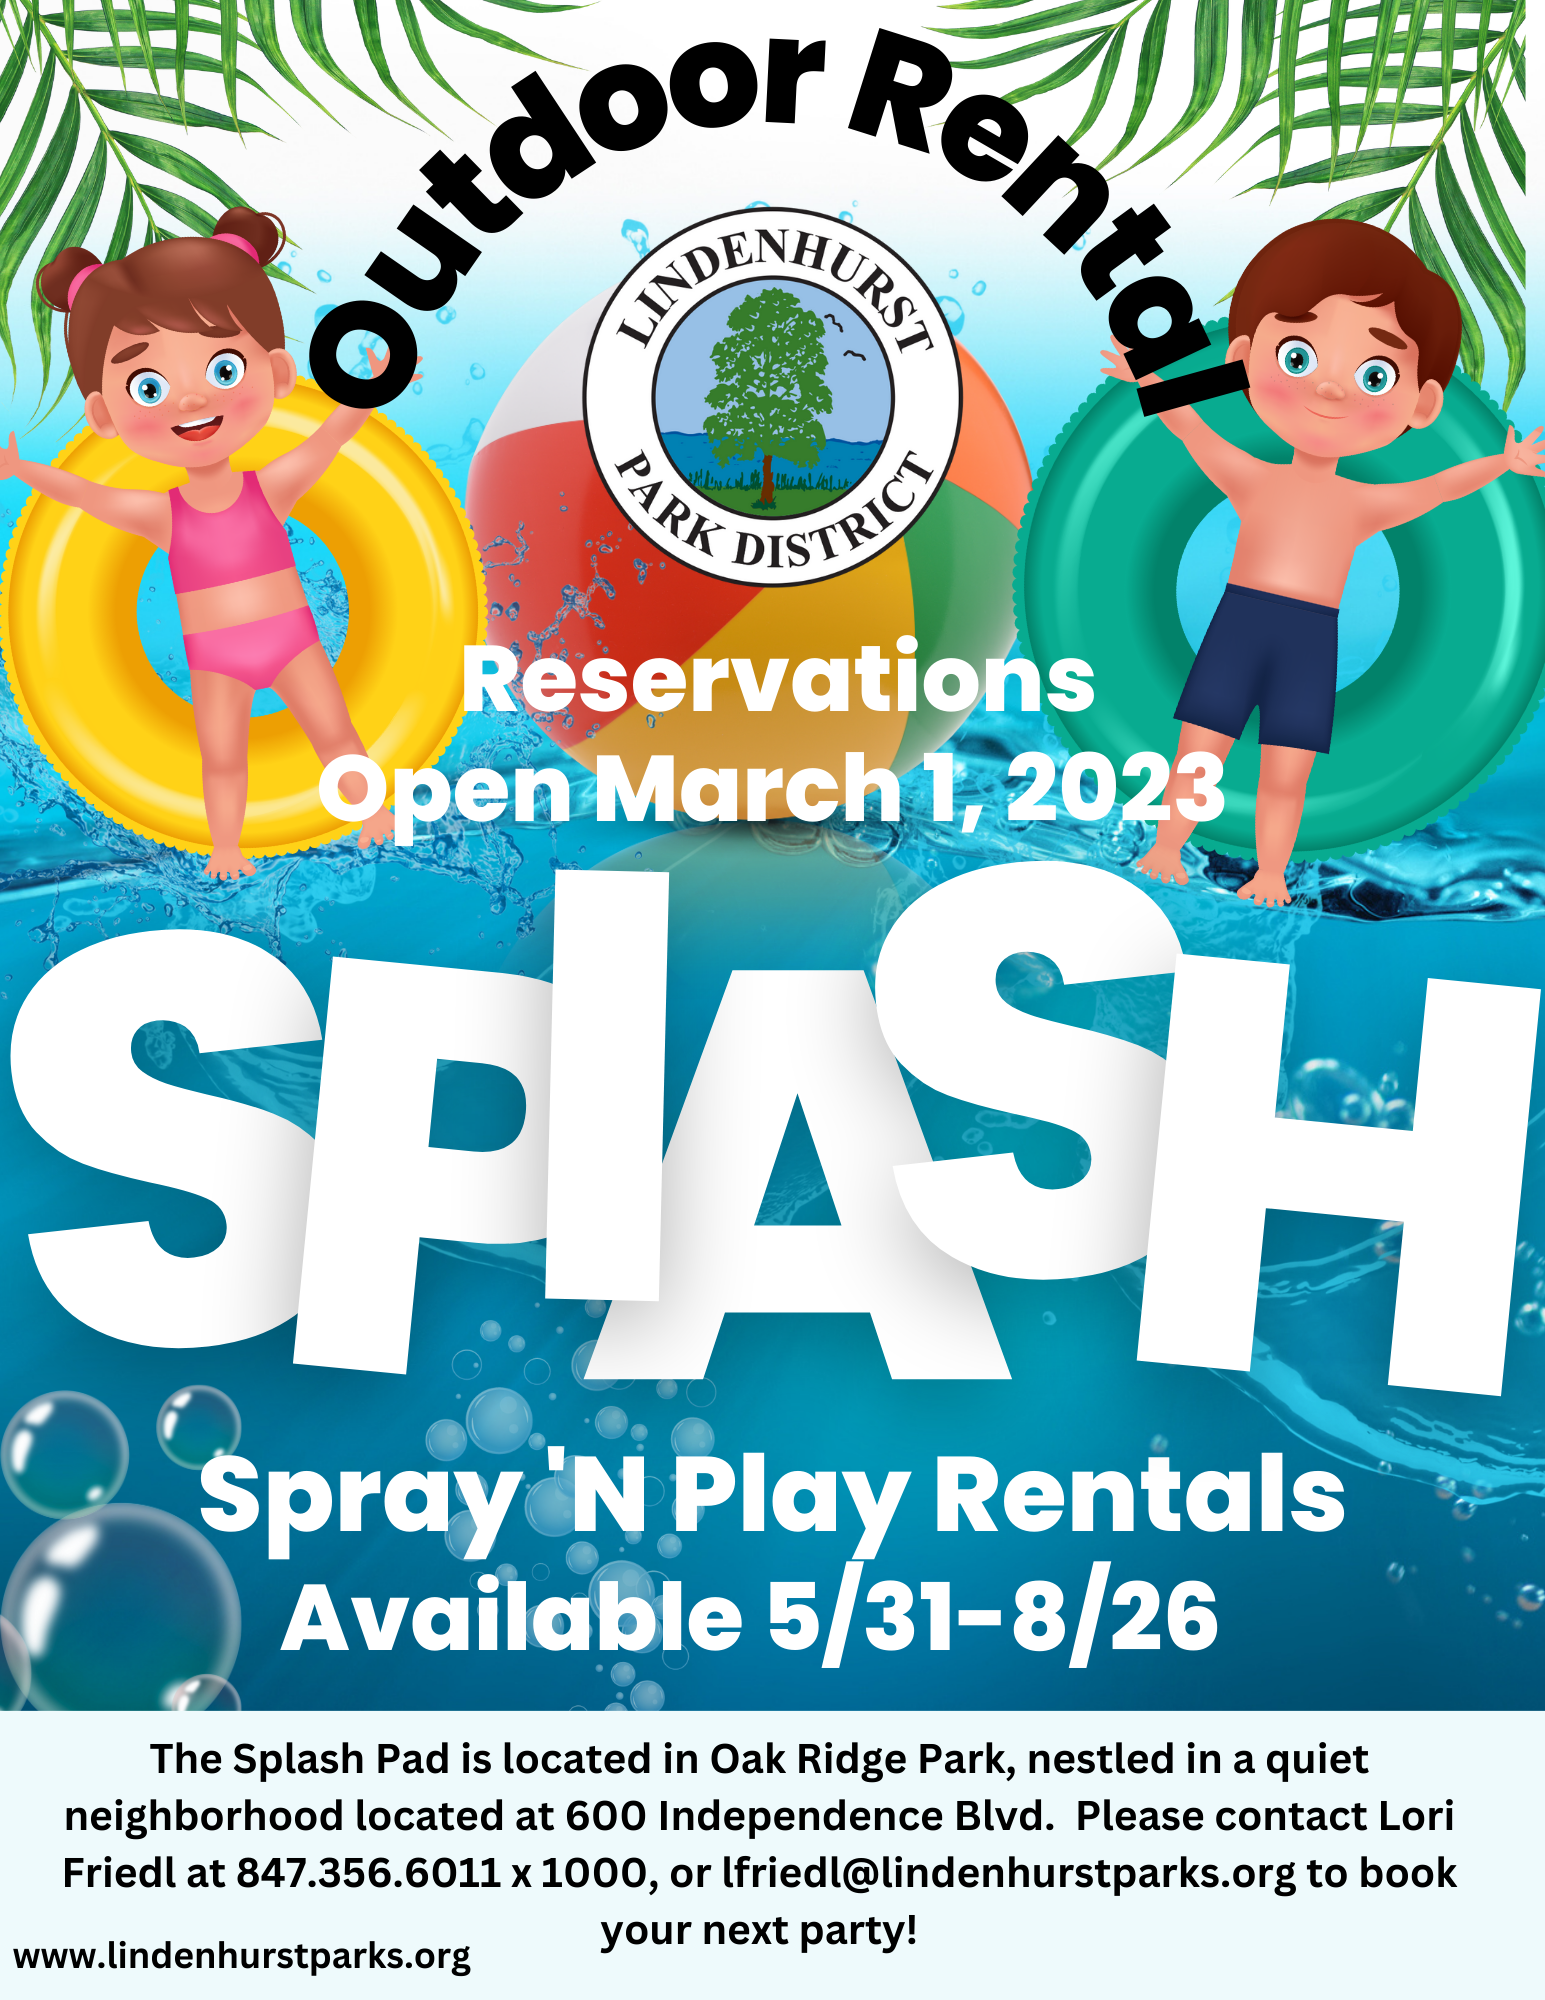 An advertisement for outdoor rental at the Lindenhurst Park District, announcing "SPLASH PAD!" rentals. It features illustrations of two happy children playing in water, with reservation openings from March 1, 2023, and rental availability from May 31 to August 26. The splash pad location is Oak Ridge Park at 600 Independence Blvd. Contact details for Lori Friedl are provided for booking parties, along with the park district's website